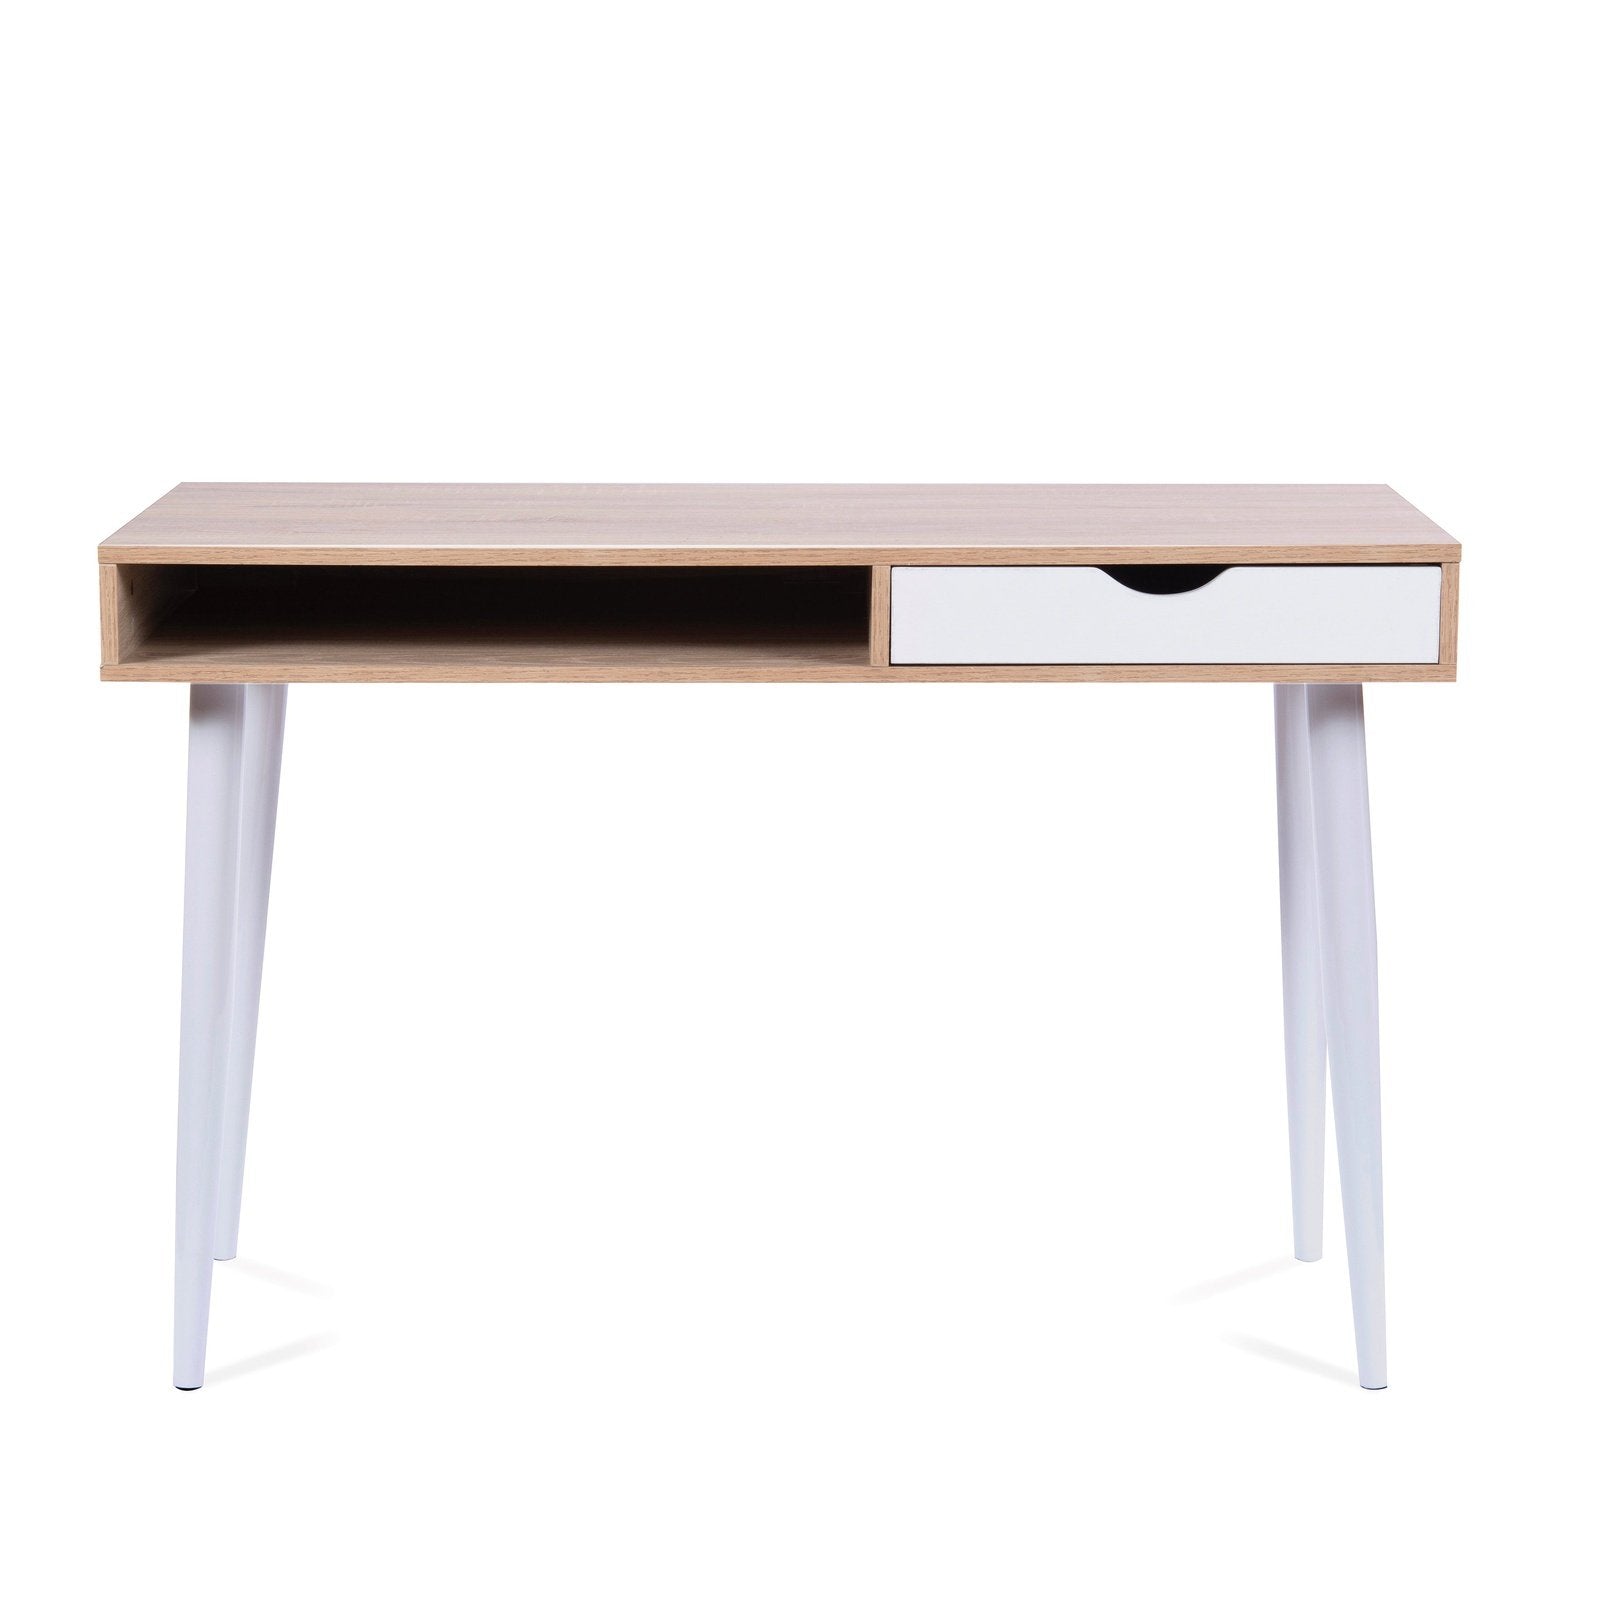 Compact Workstation with White Legs, Stylish Complementing Drawer and Open Storage Compartment - Office Products Online